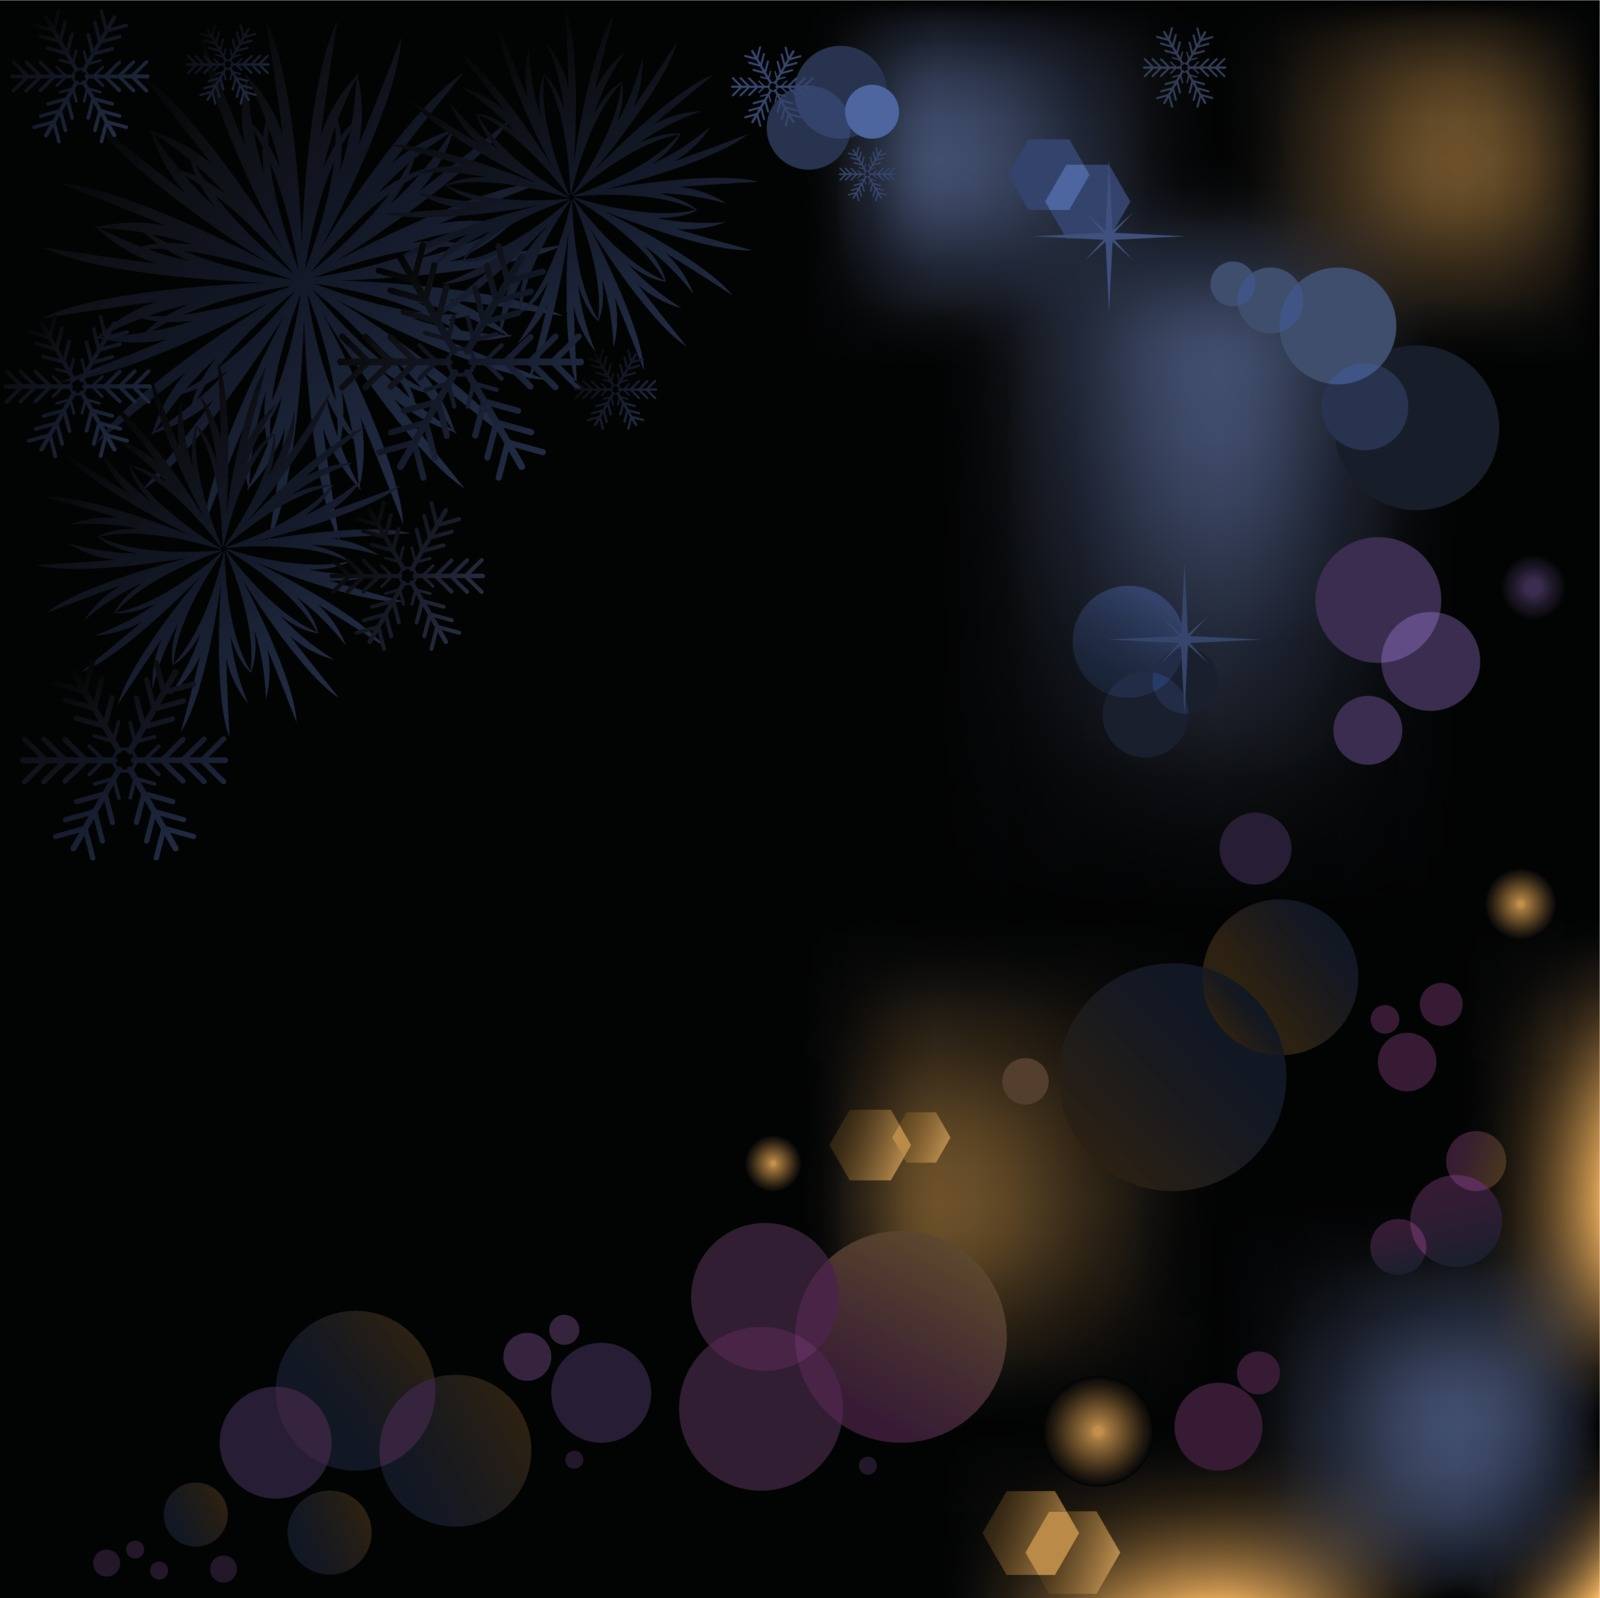 abstract black background with snowflakes and bokeh effect